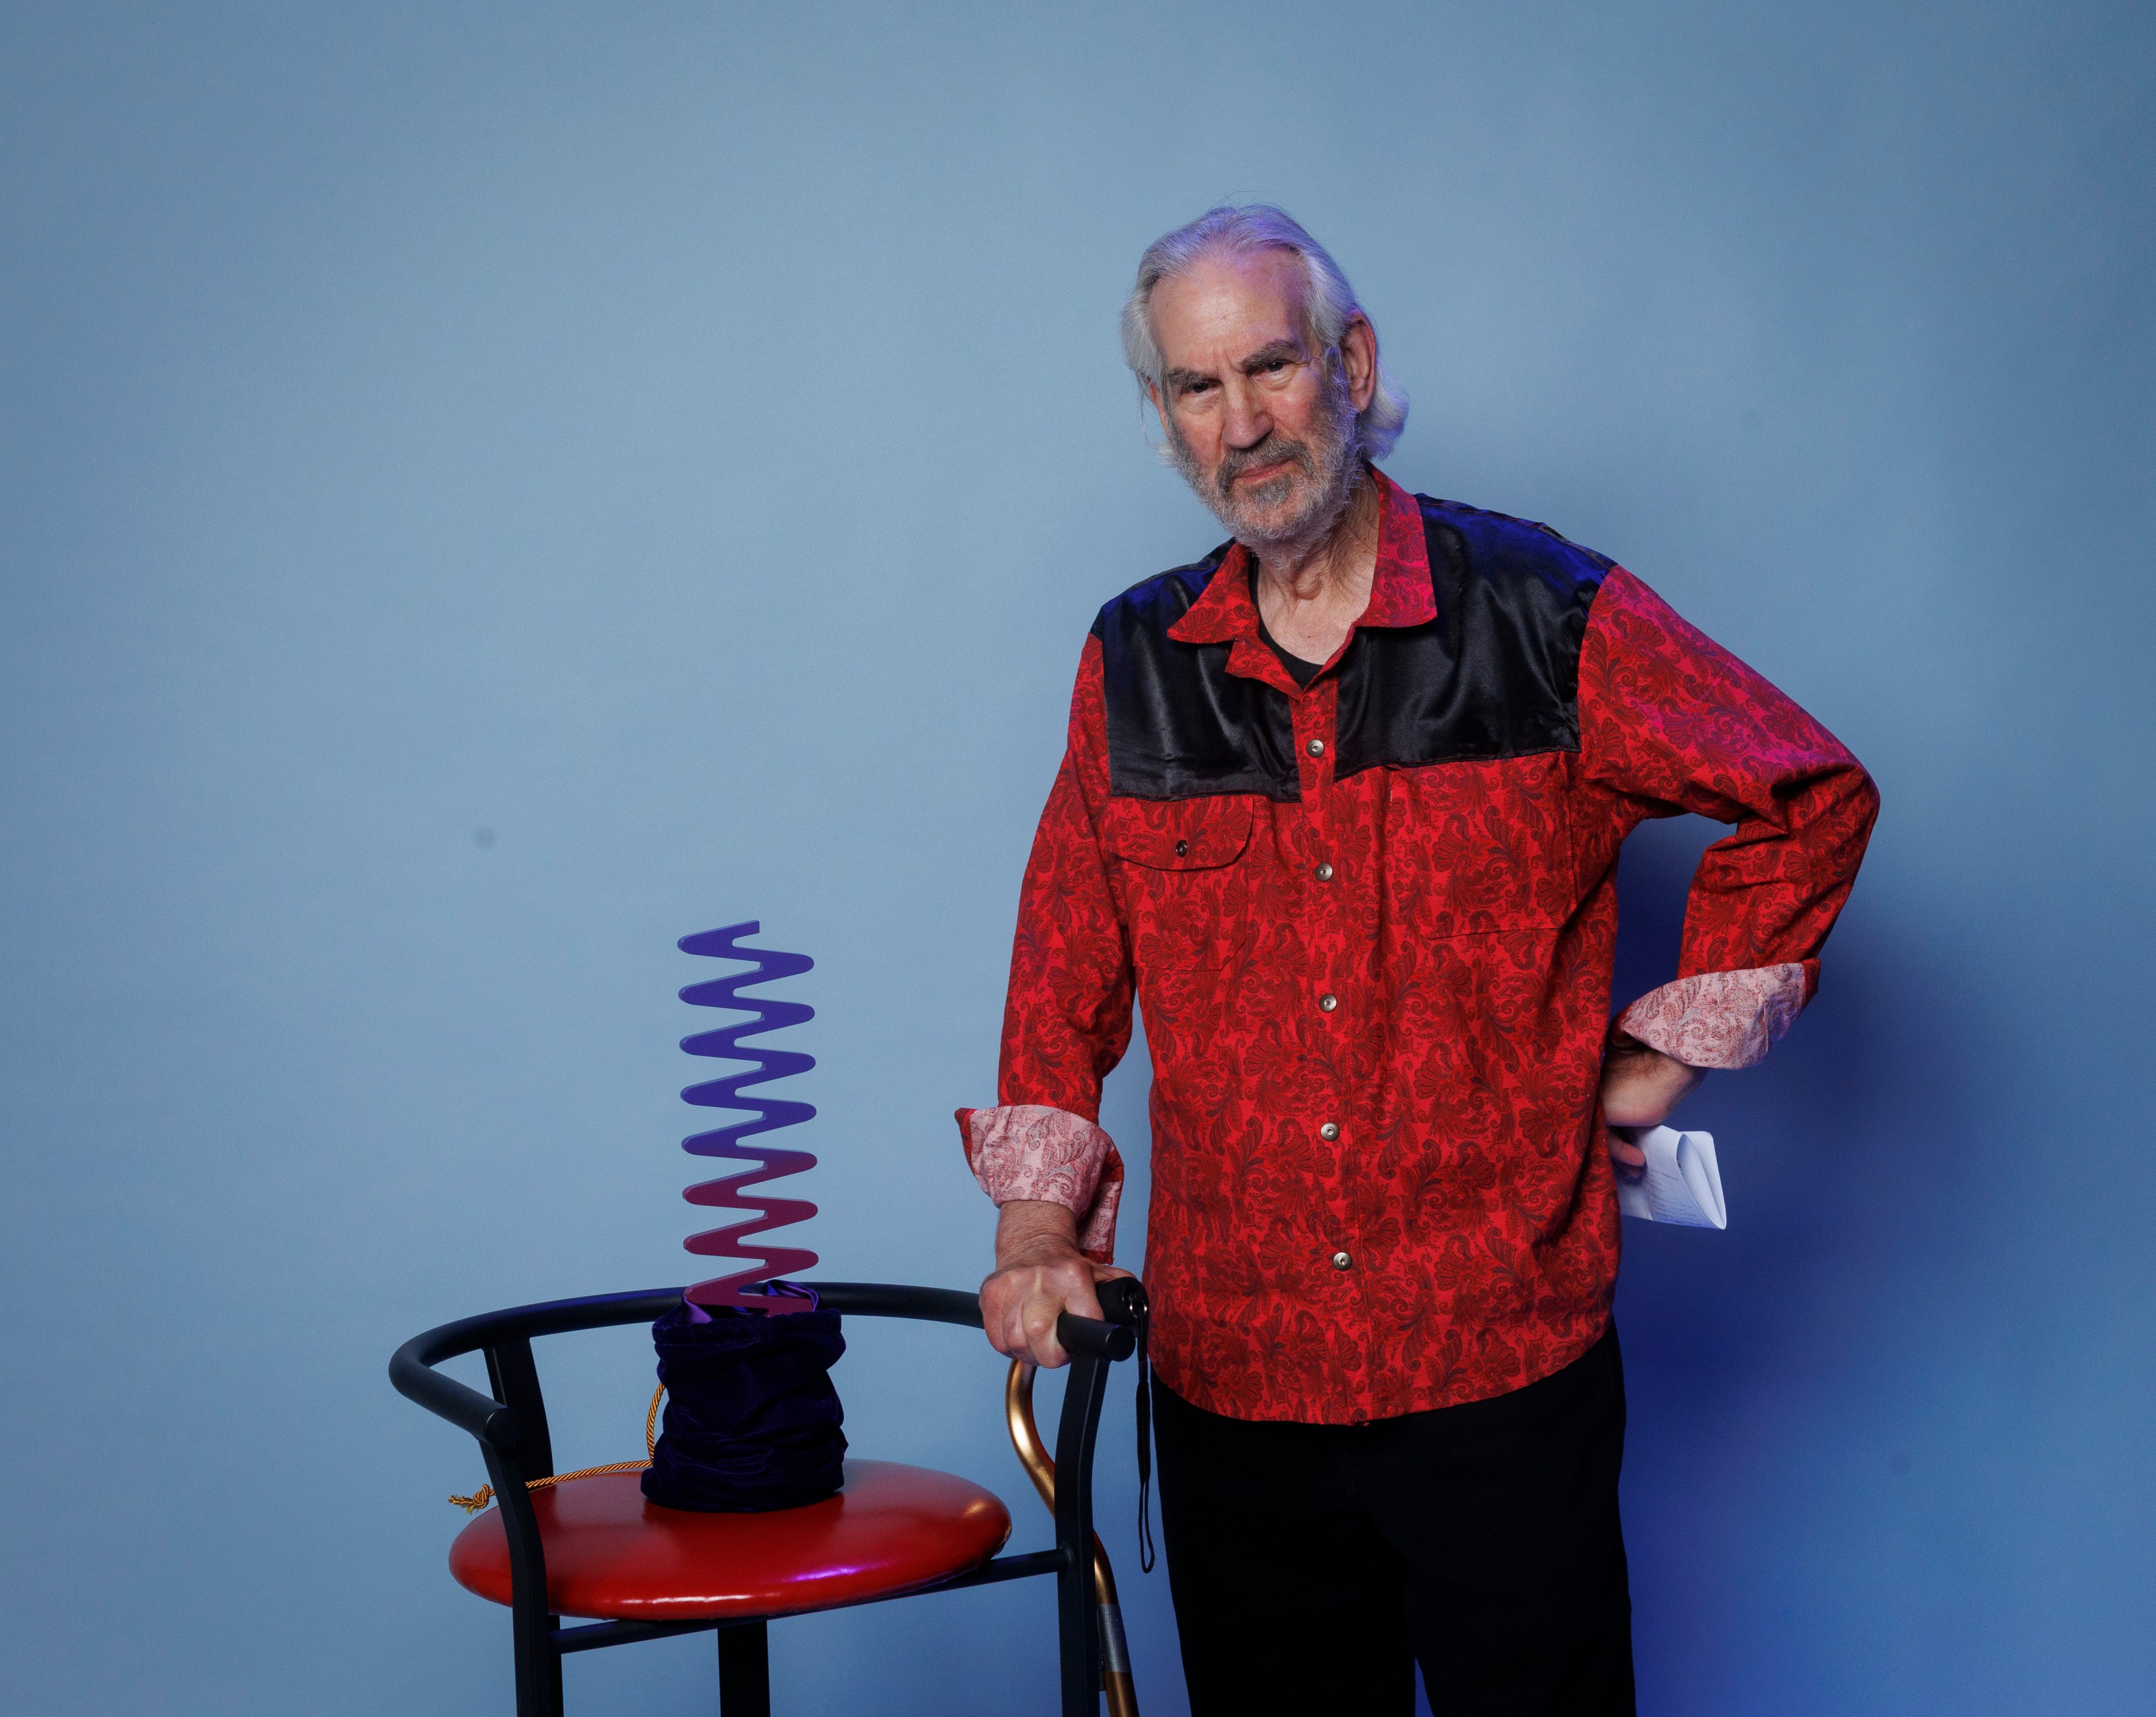 Dave Margoshes - Older white male wearing a red and black, button-down shirt, supporting balance on a walking stick in one hand and the the other hand akimbo. He is standing next to a chair with a blue and purple Ombre wavelength award in a velvet dark blue pouch gathered at the base of the award.